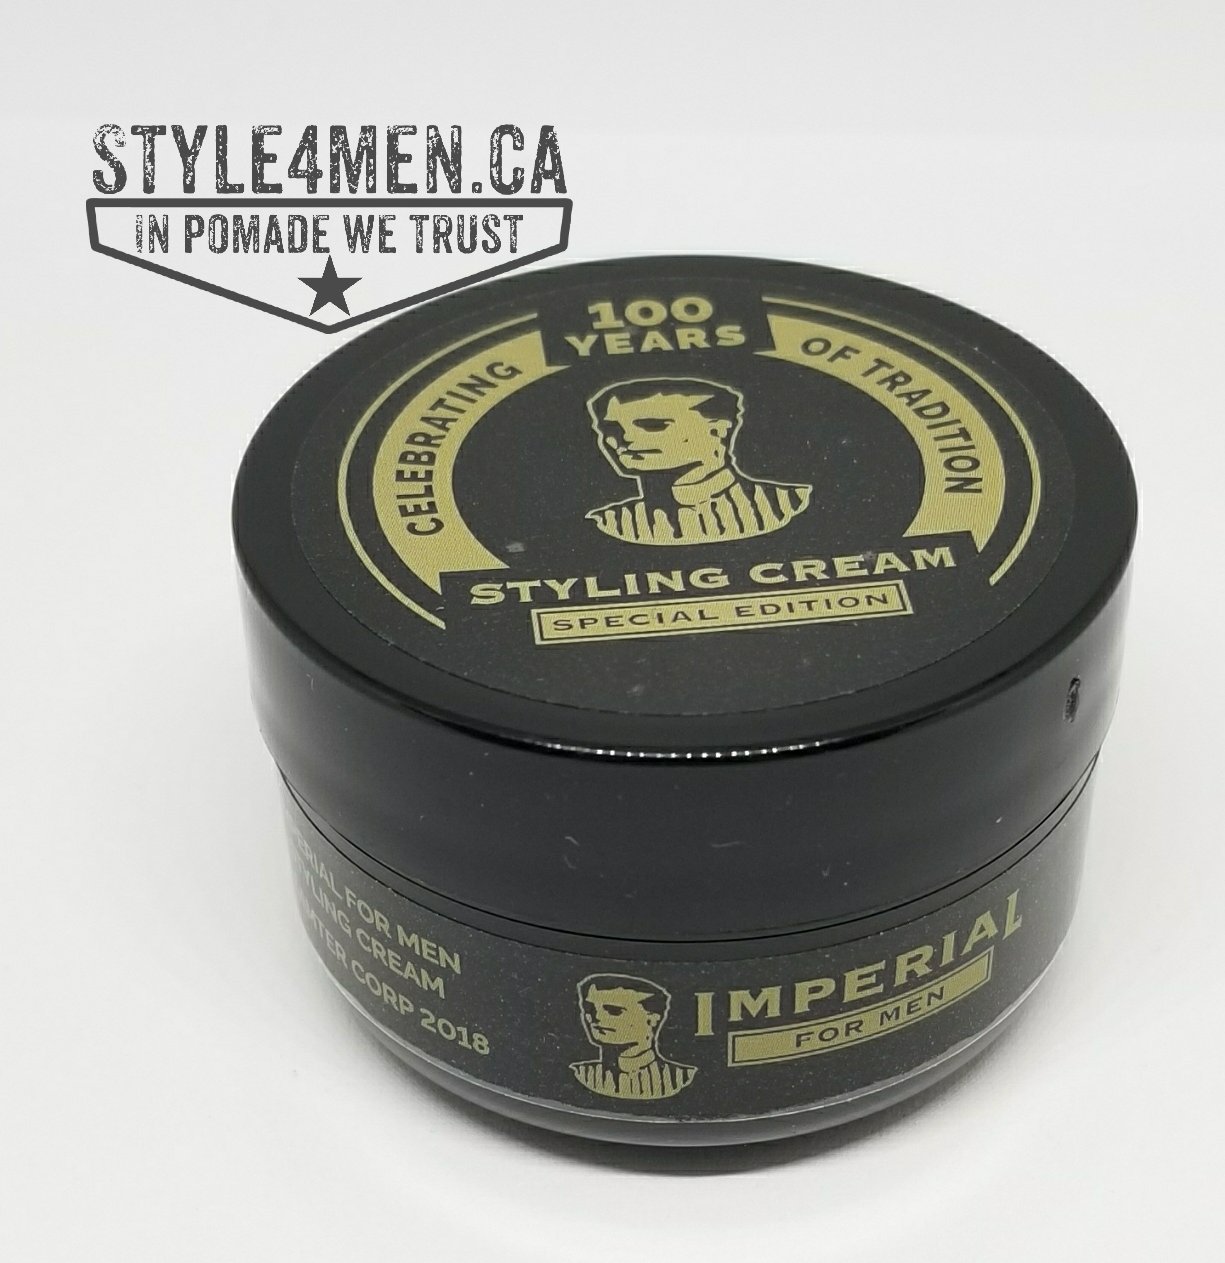 Imperial Styling Cream